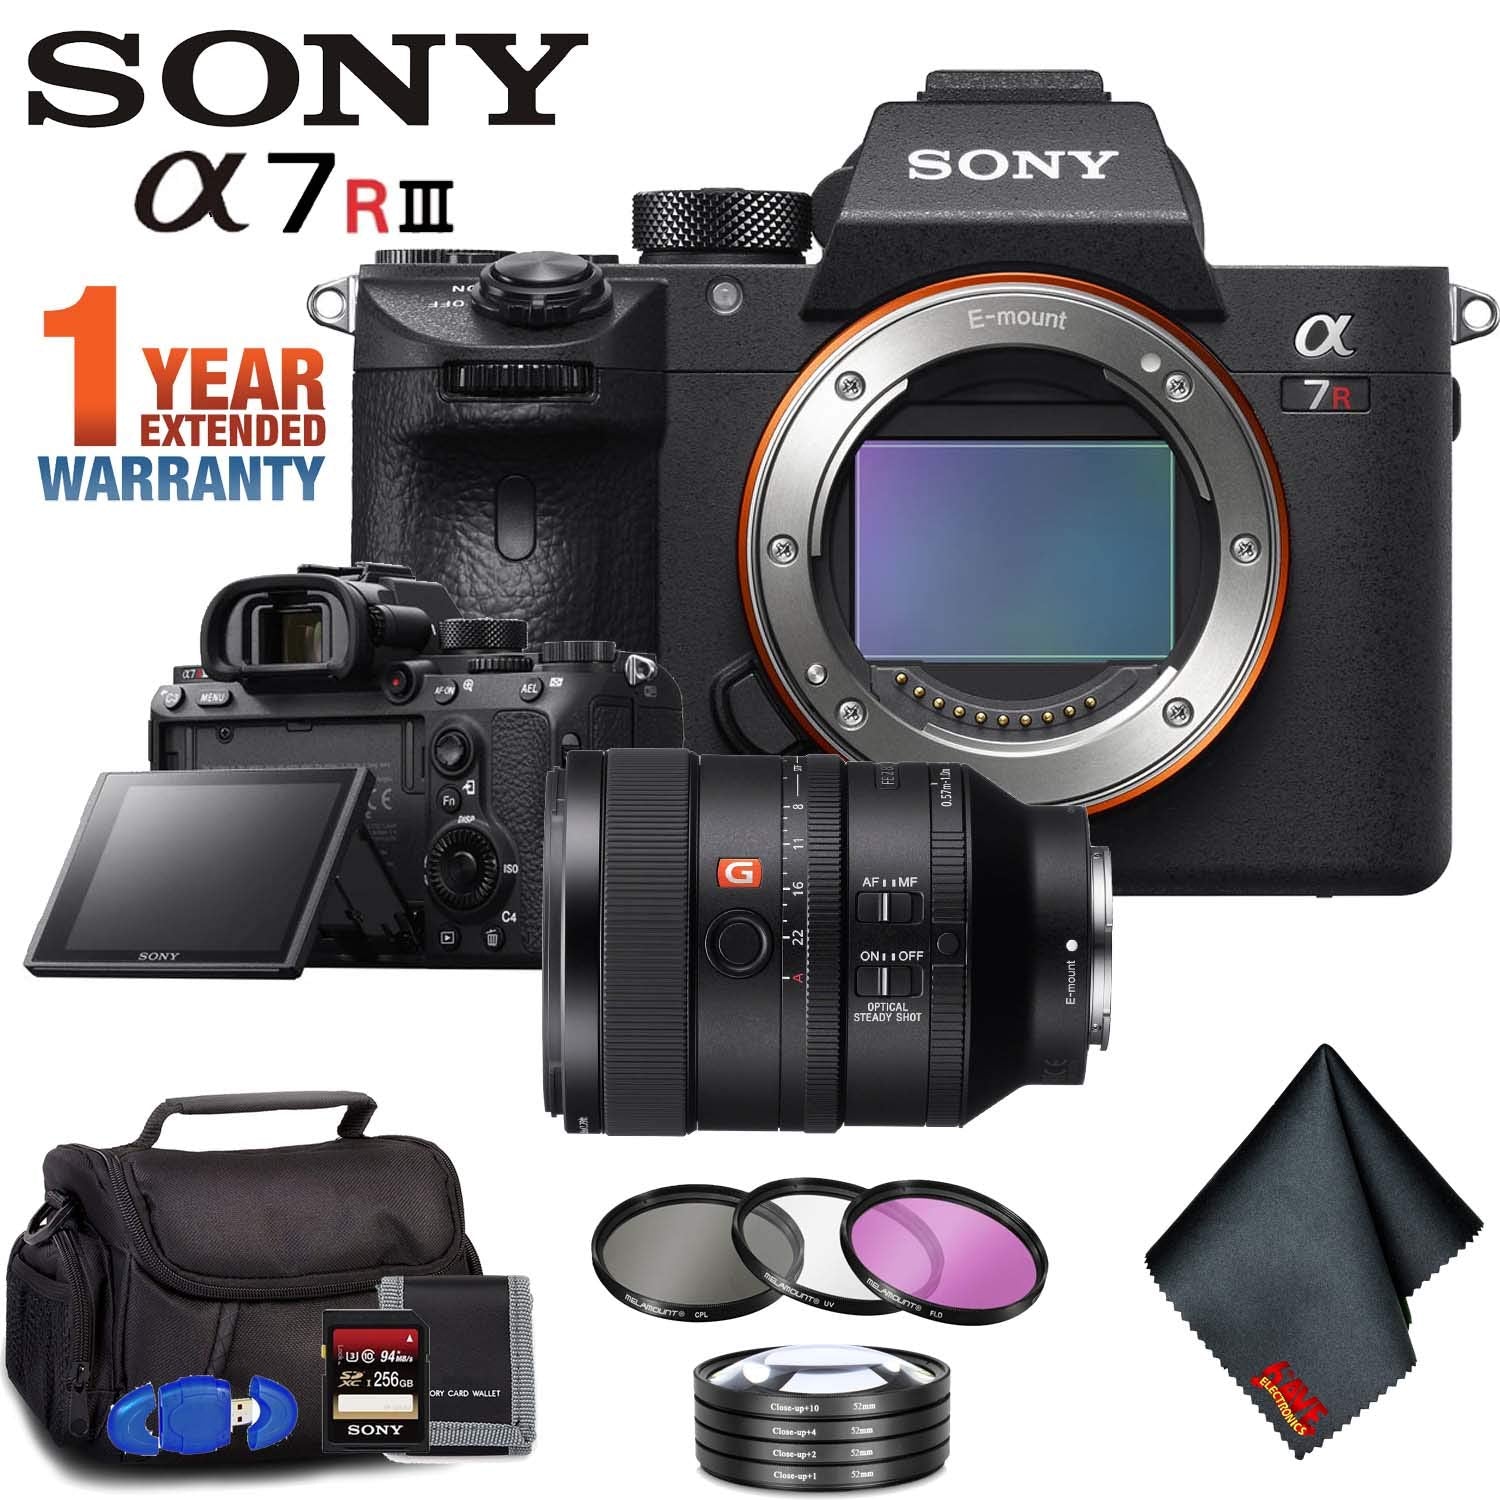 Sony Alpha a7R III Mirrorless Digital Camera (Body Only) + 100mm Lens + Filter Kit + Memory Card Kit + Carrying Case + E Ultimate Bundle